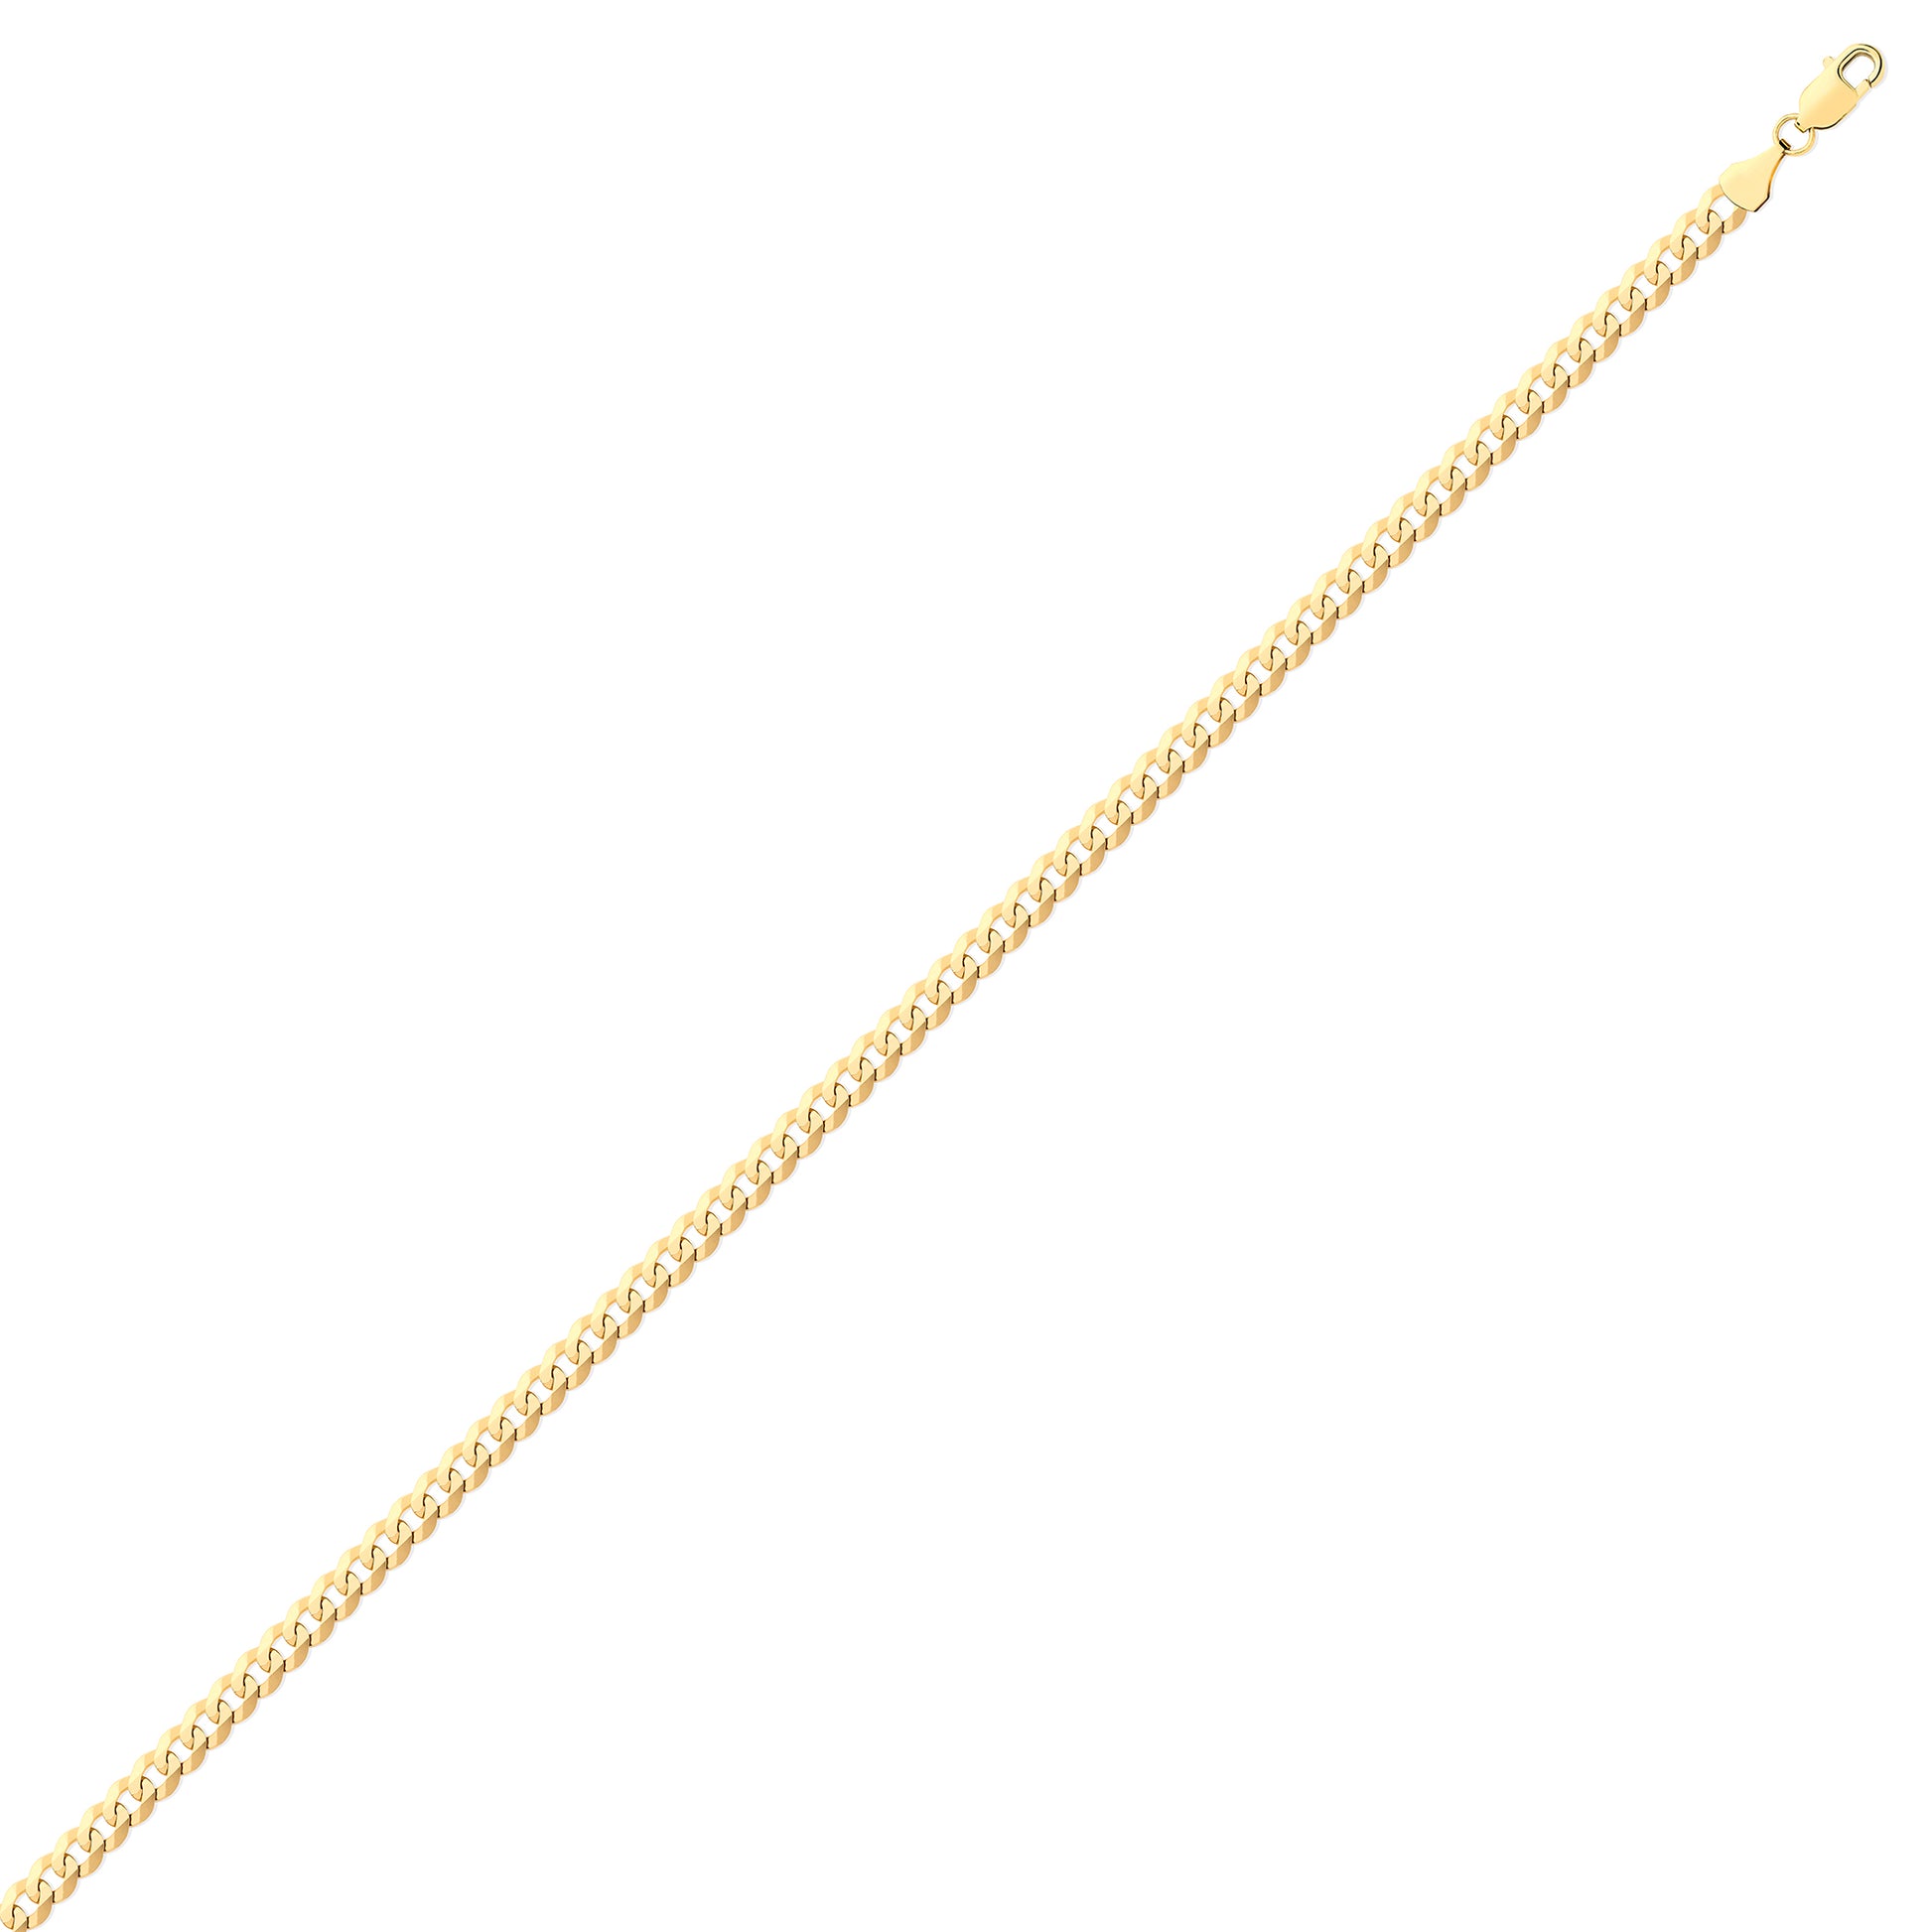 Unisex 9ct Gold  Bevelled Flat Curb Chain Necklace 4mm -